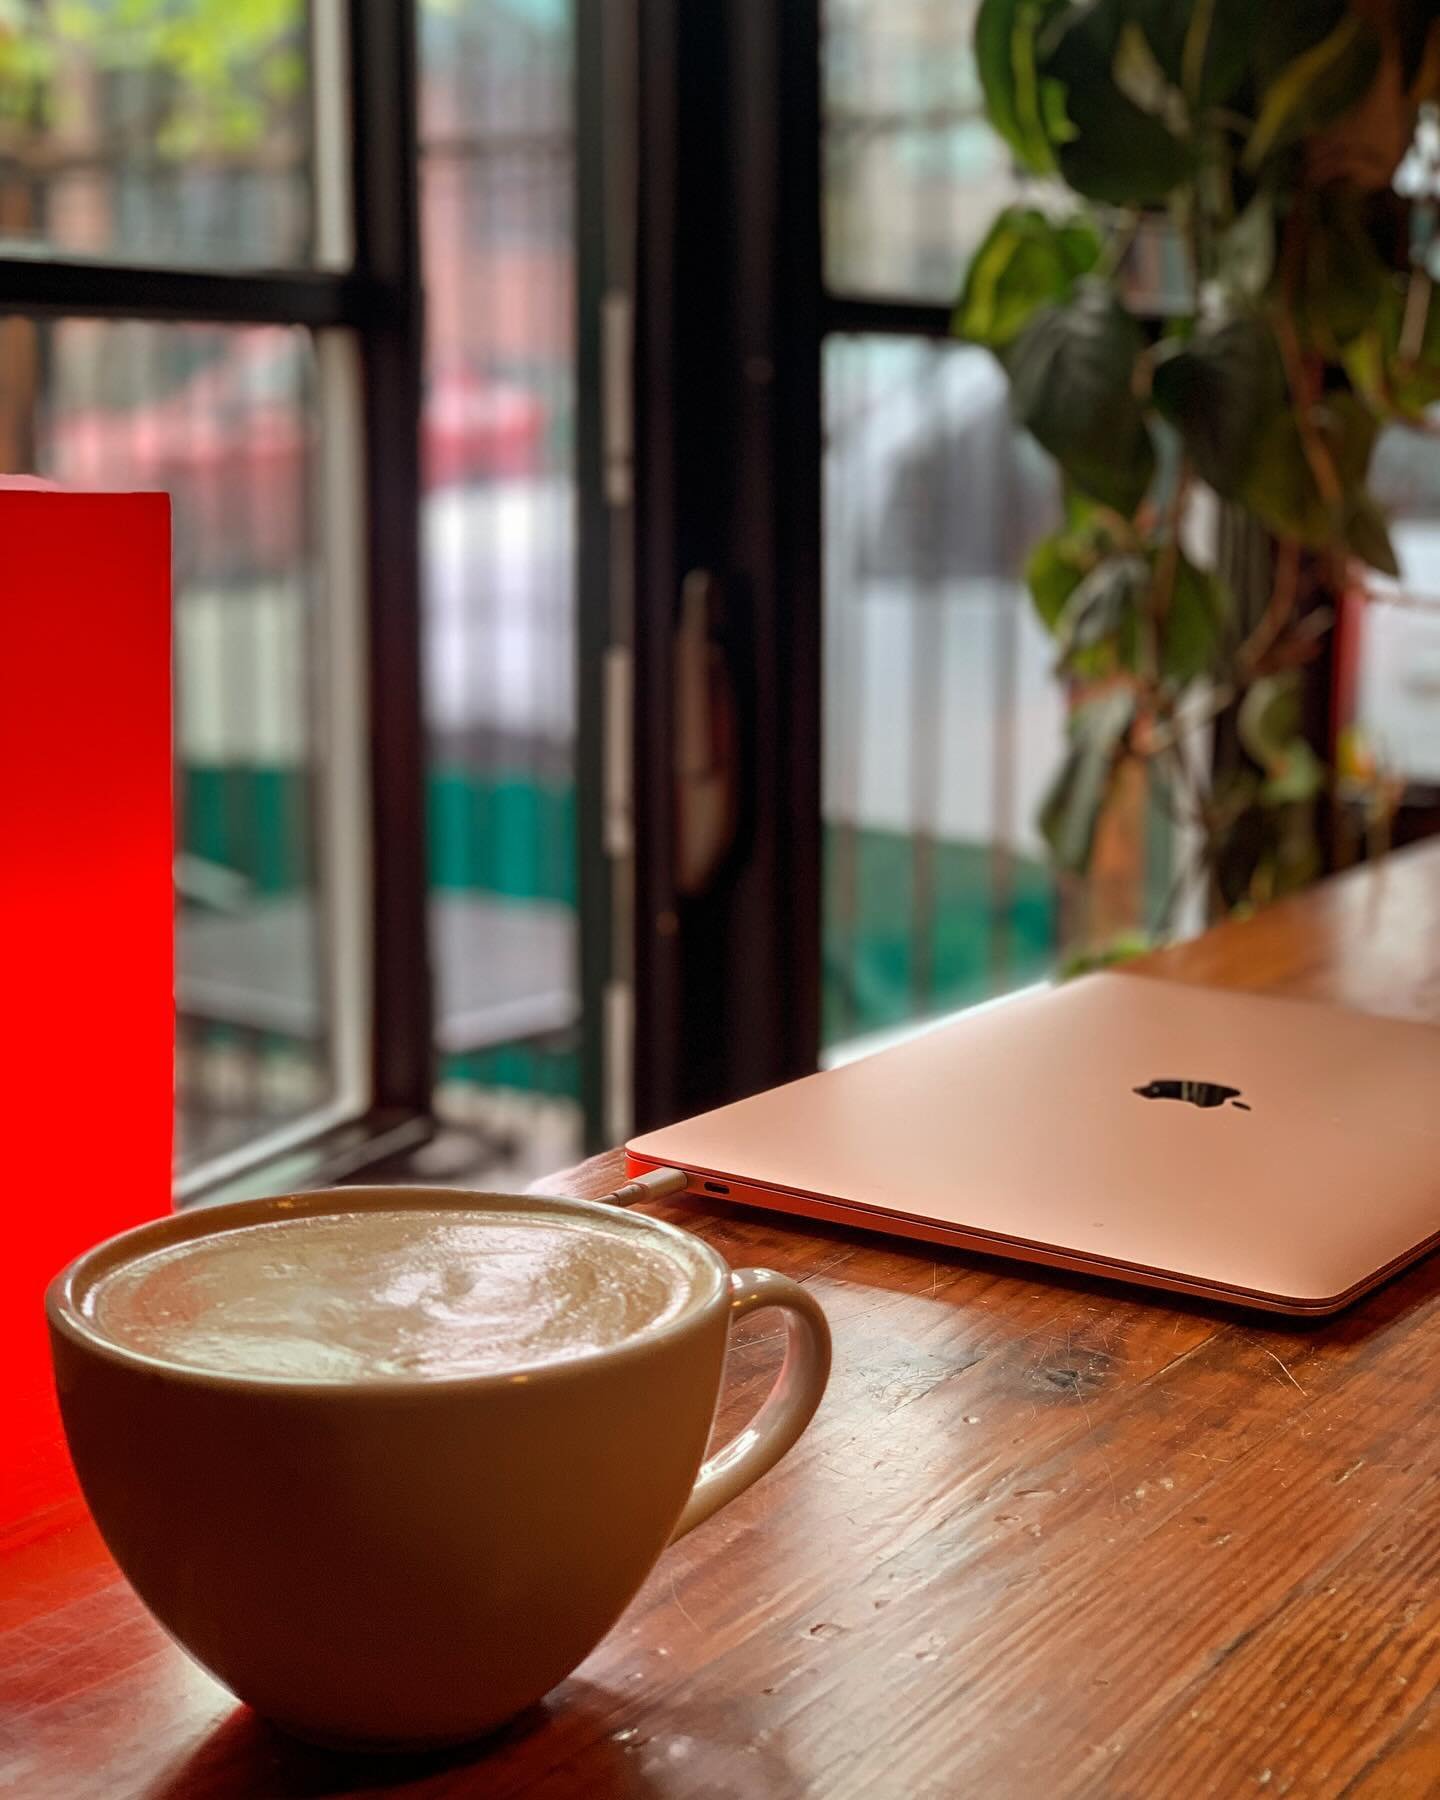 It won&rsquo;t feel like work when you work from Hotwire Coffee. 😃 Free WiFi and access to a printer &mdash;what more do you need?➕☕️

#hotwire #seattlecoffee #specialsofthemonth #hotwirecoffee #westseattle #coffeeholic #caffeine #igcoffee #icedcoff